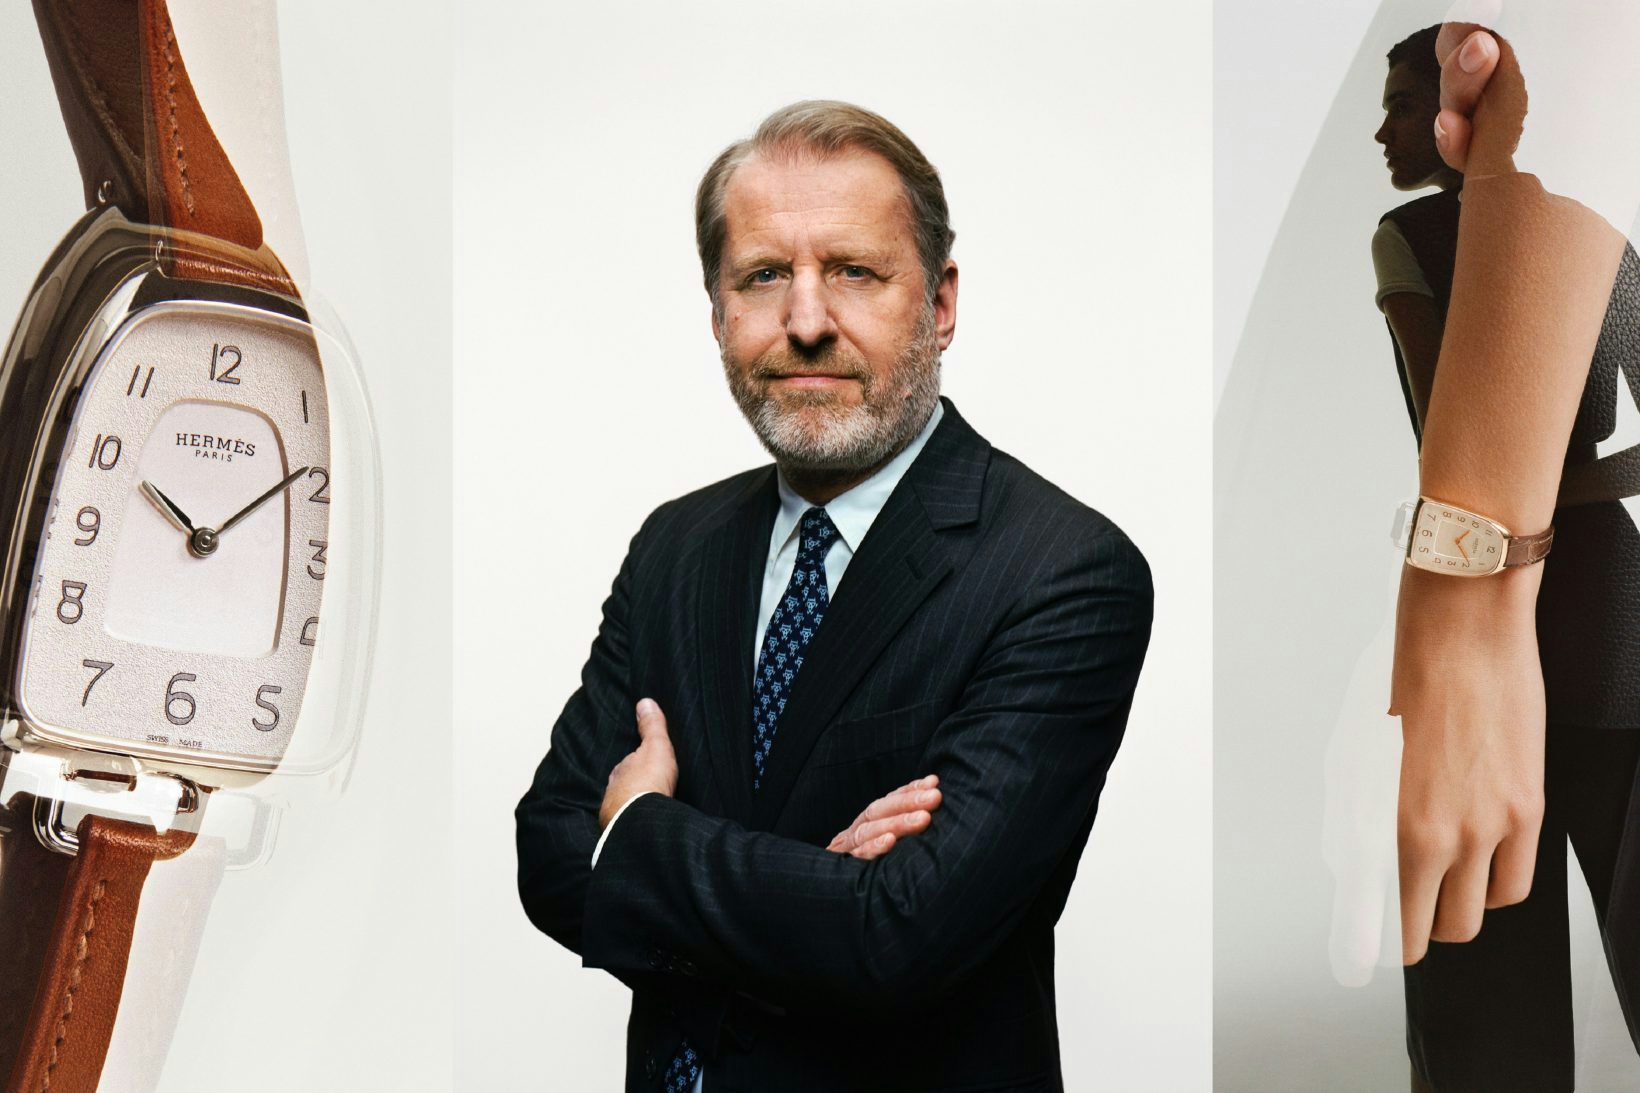 « To Hermès, taking a stance in watchmaking was very formative »